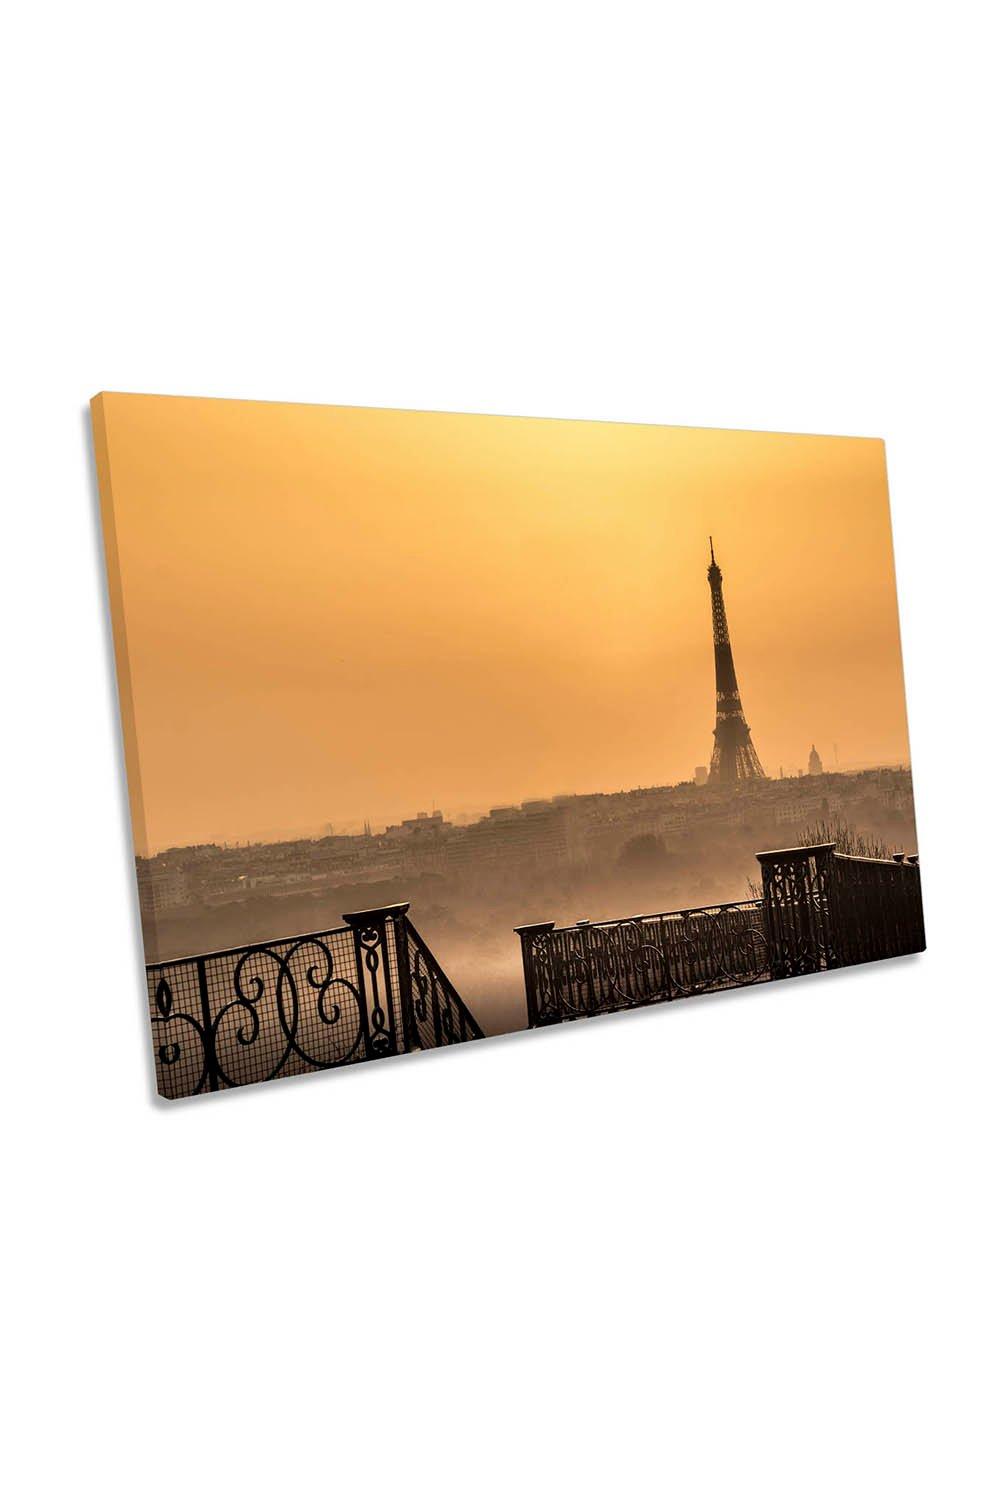 The Awakening of the Iron Lady Eiffel Tower Canvas Wall Art Picture Print